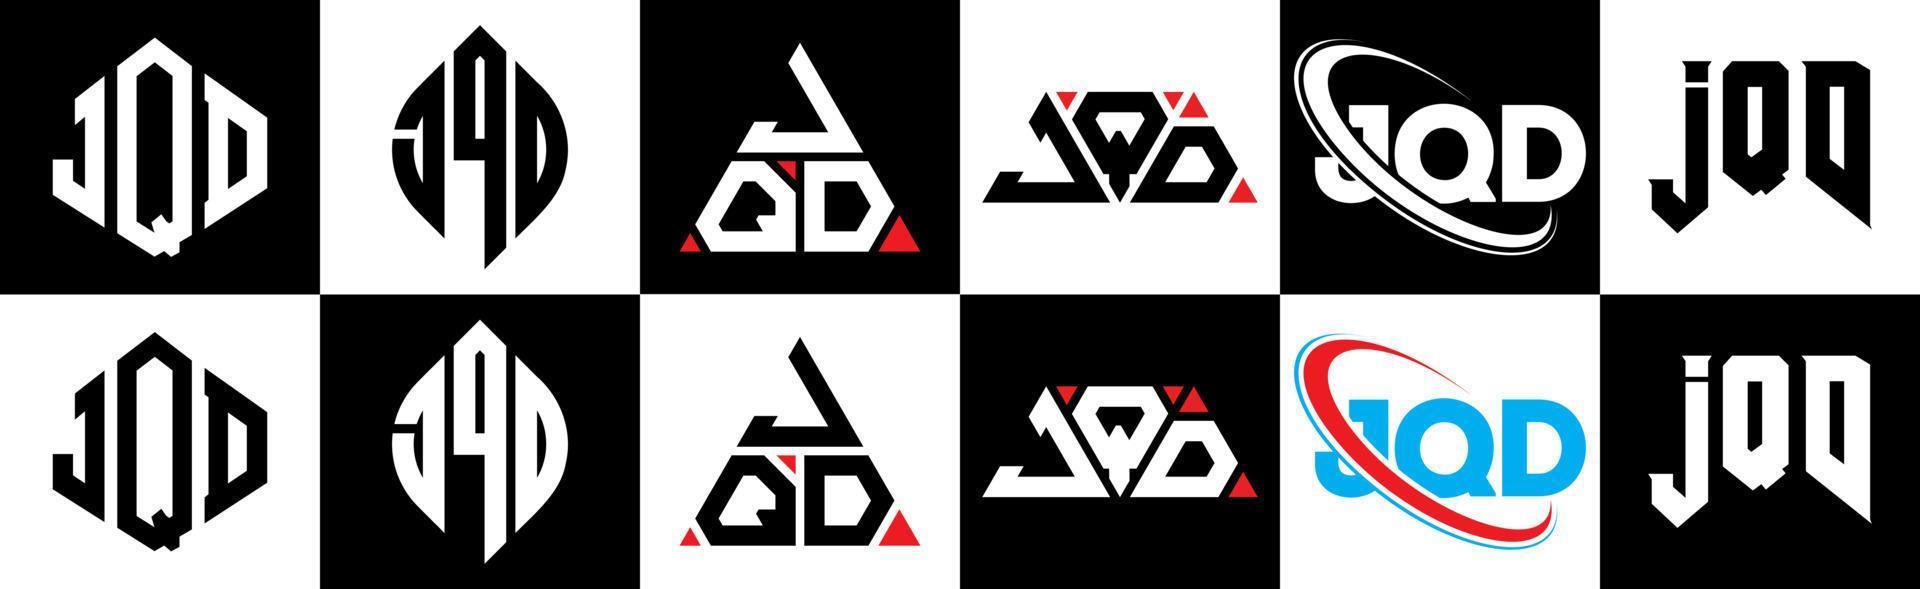 JQD letter logo design in six style. JQD polygon, circle, triangle, hexagon, flat and simple style with black and white color variation letter logo set in one artboard. JQD minimalist and classic logo vector